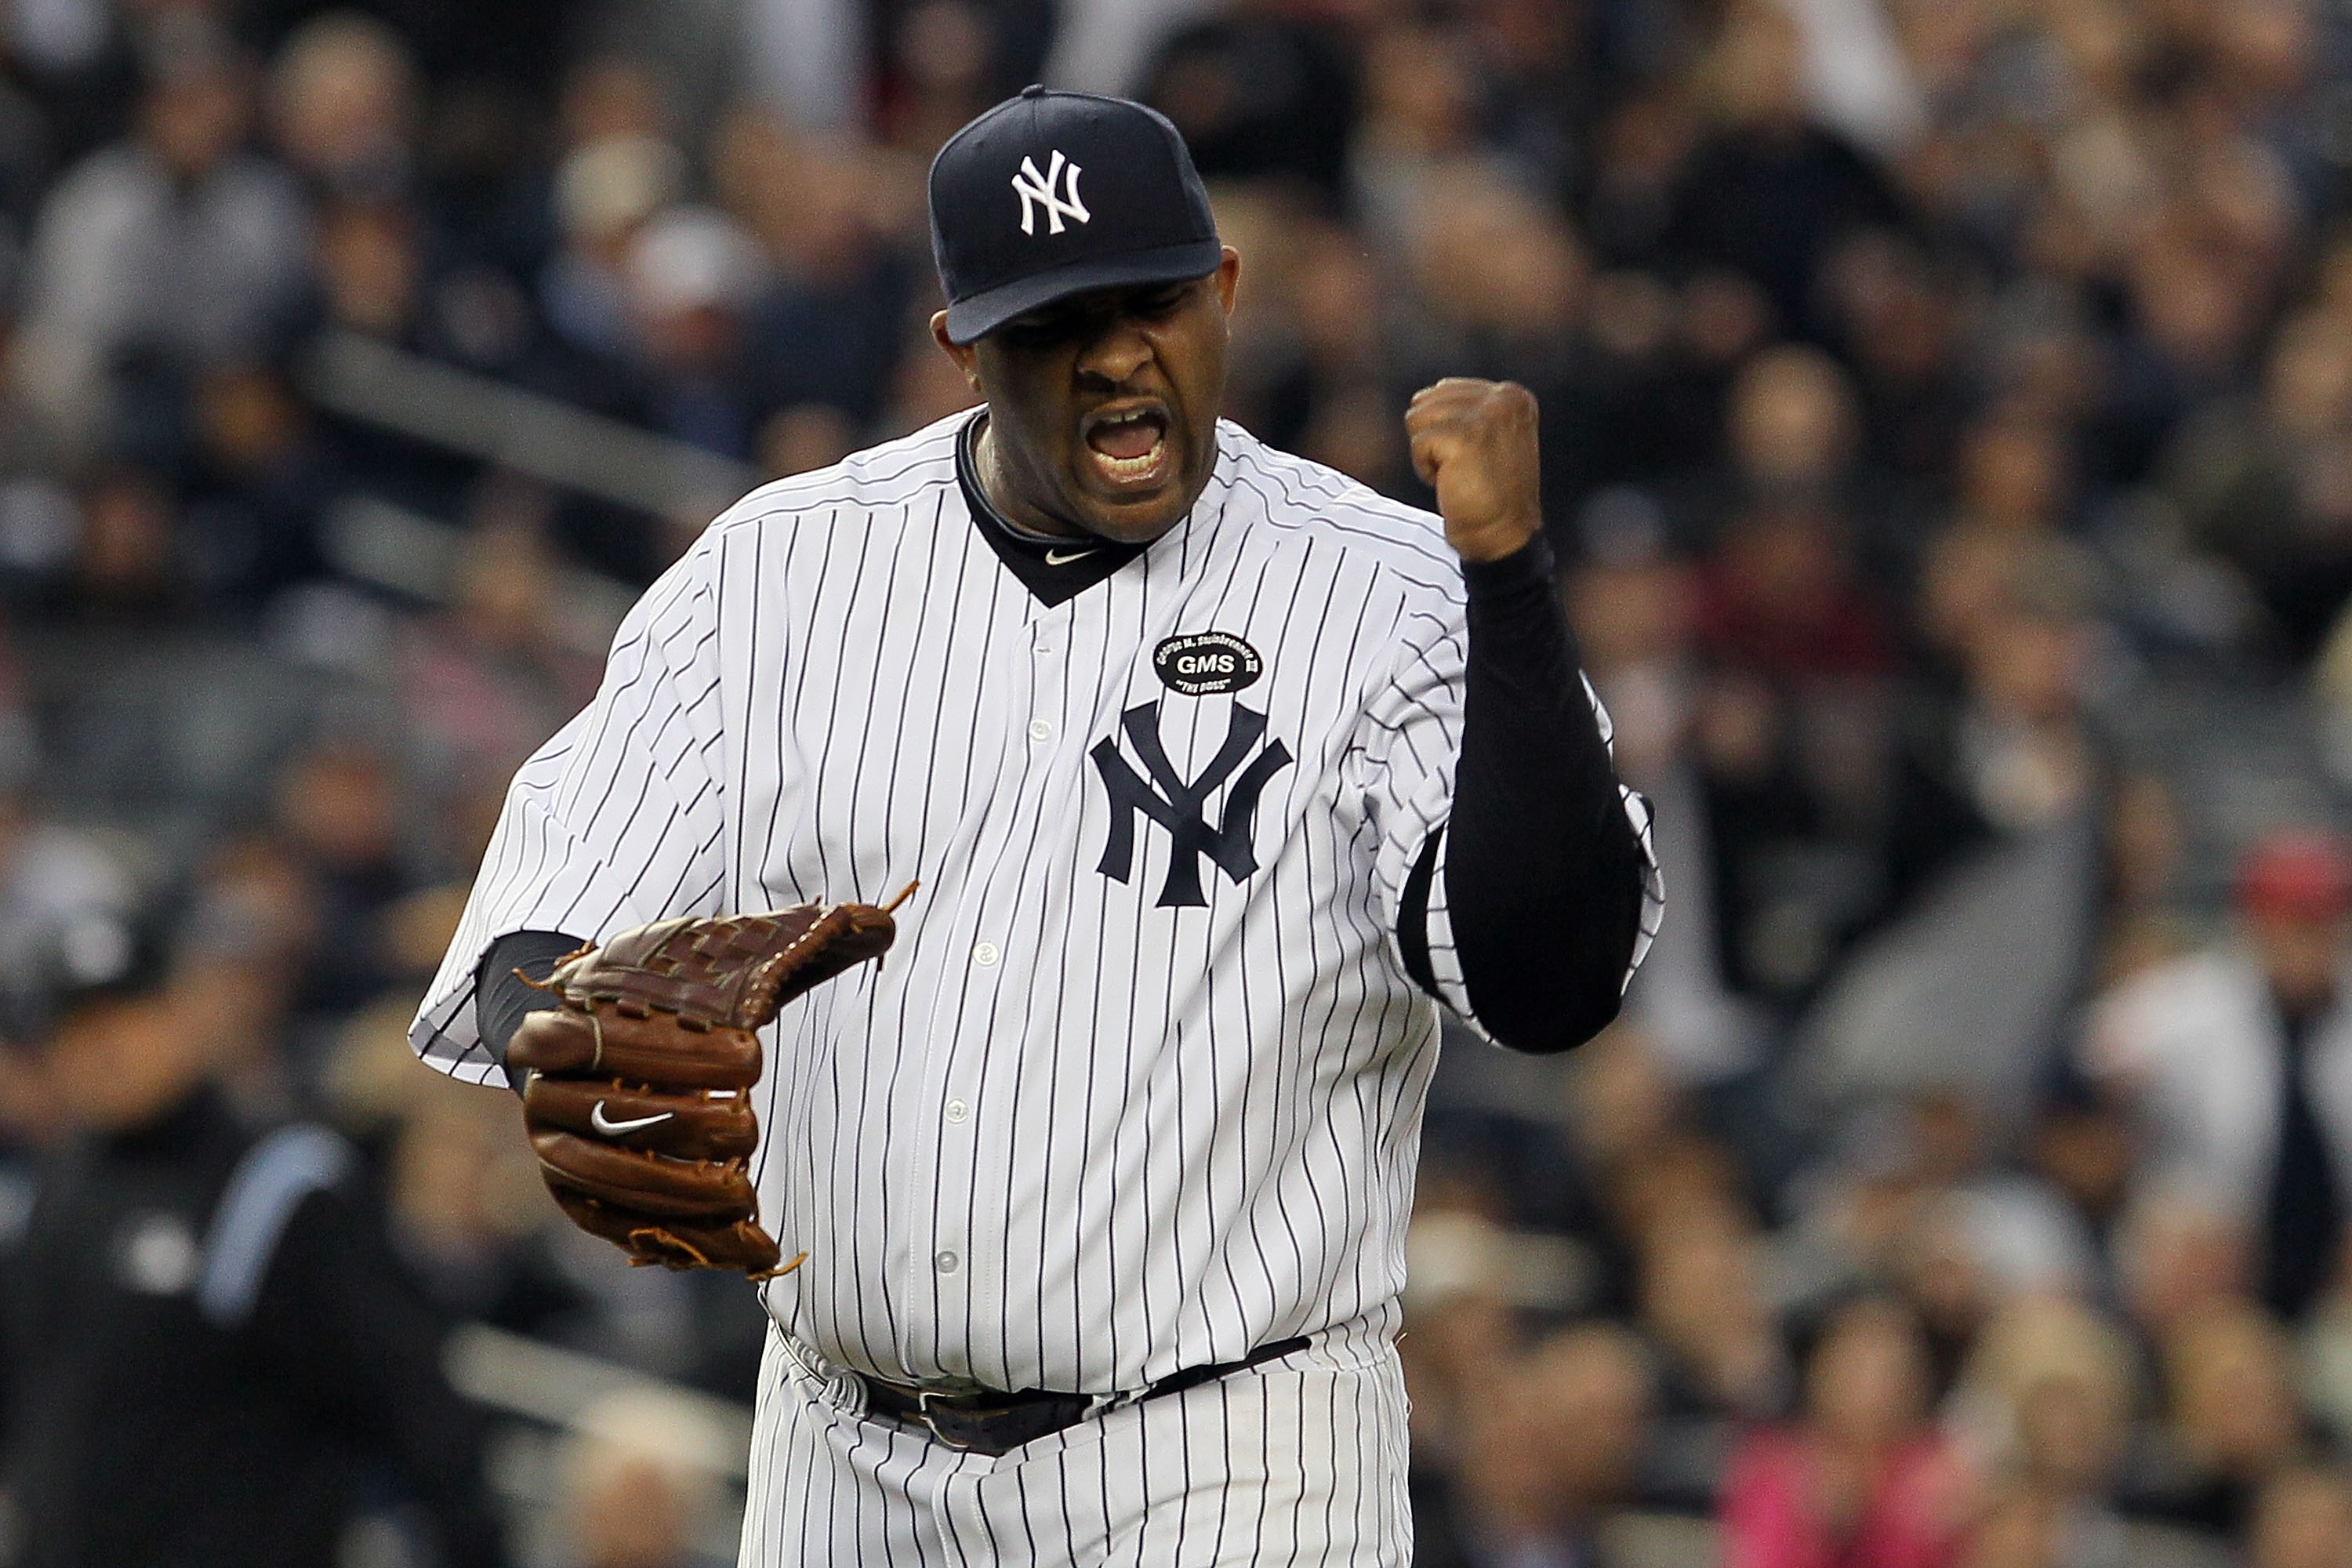 C.C. Sabathia May Be Friends With LeBron James, but His Heart